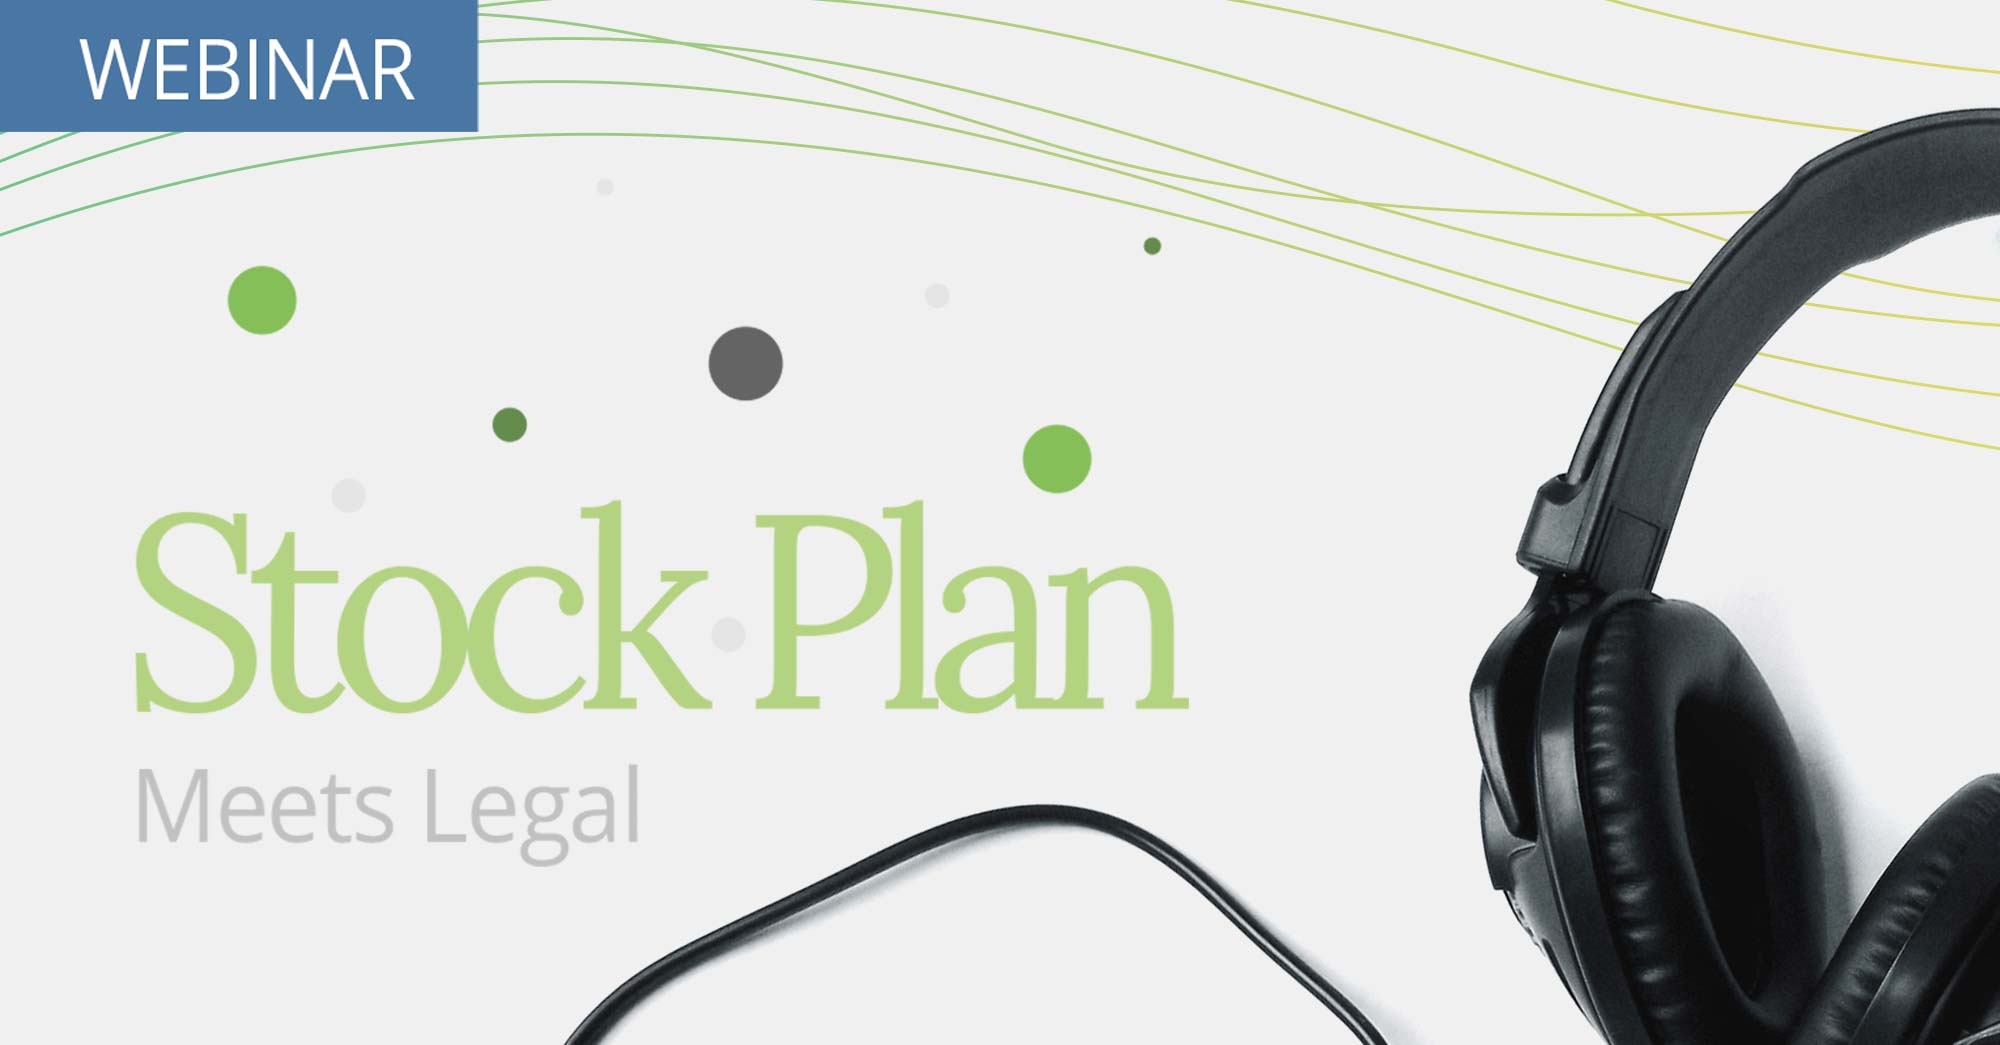 Webinar: When Stock Plans Meet Legal: Lessons to Make Your Life Easier